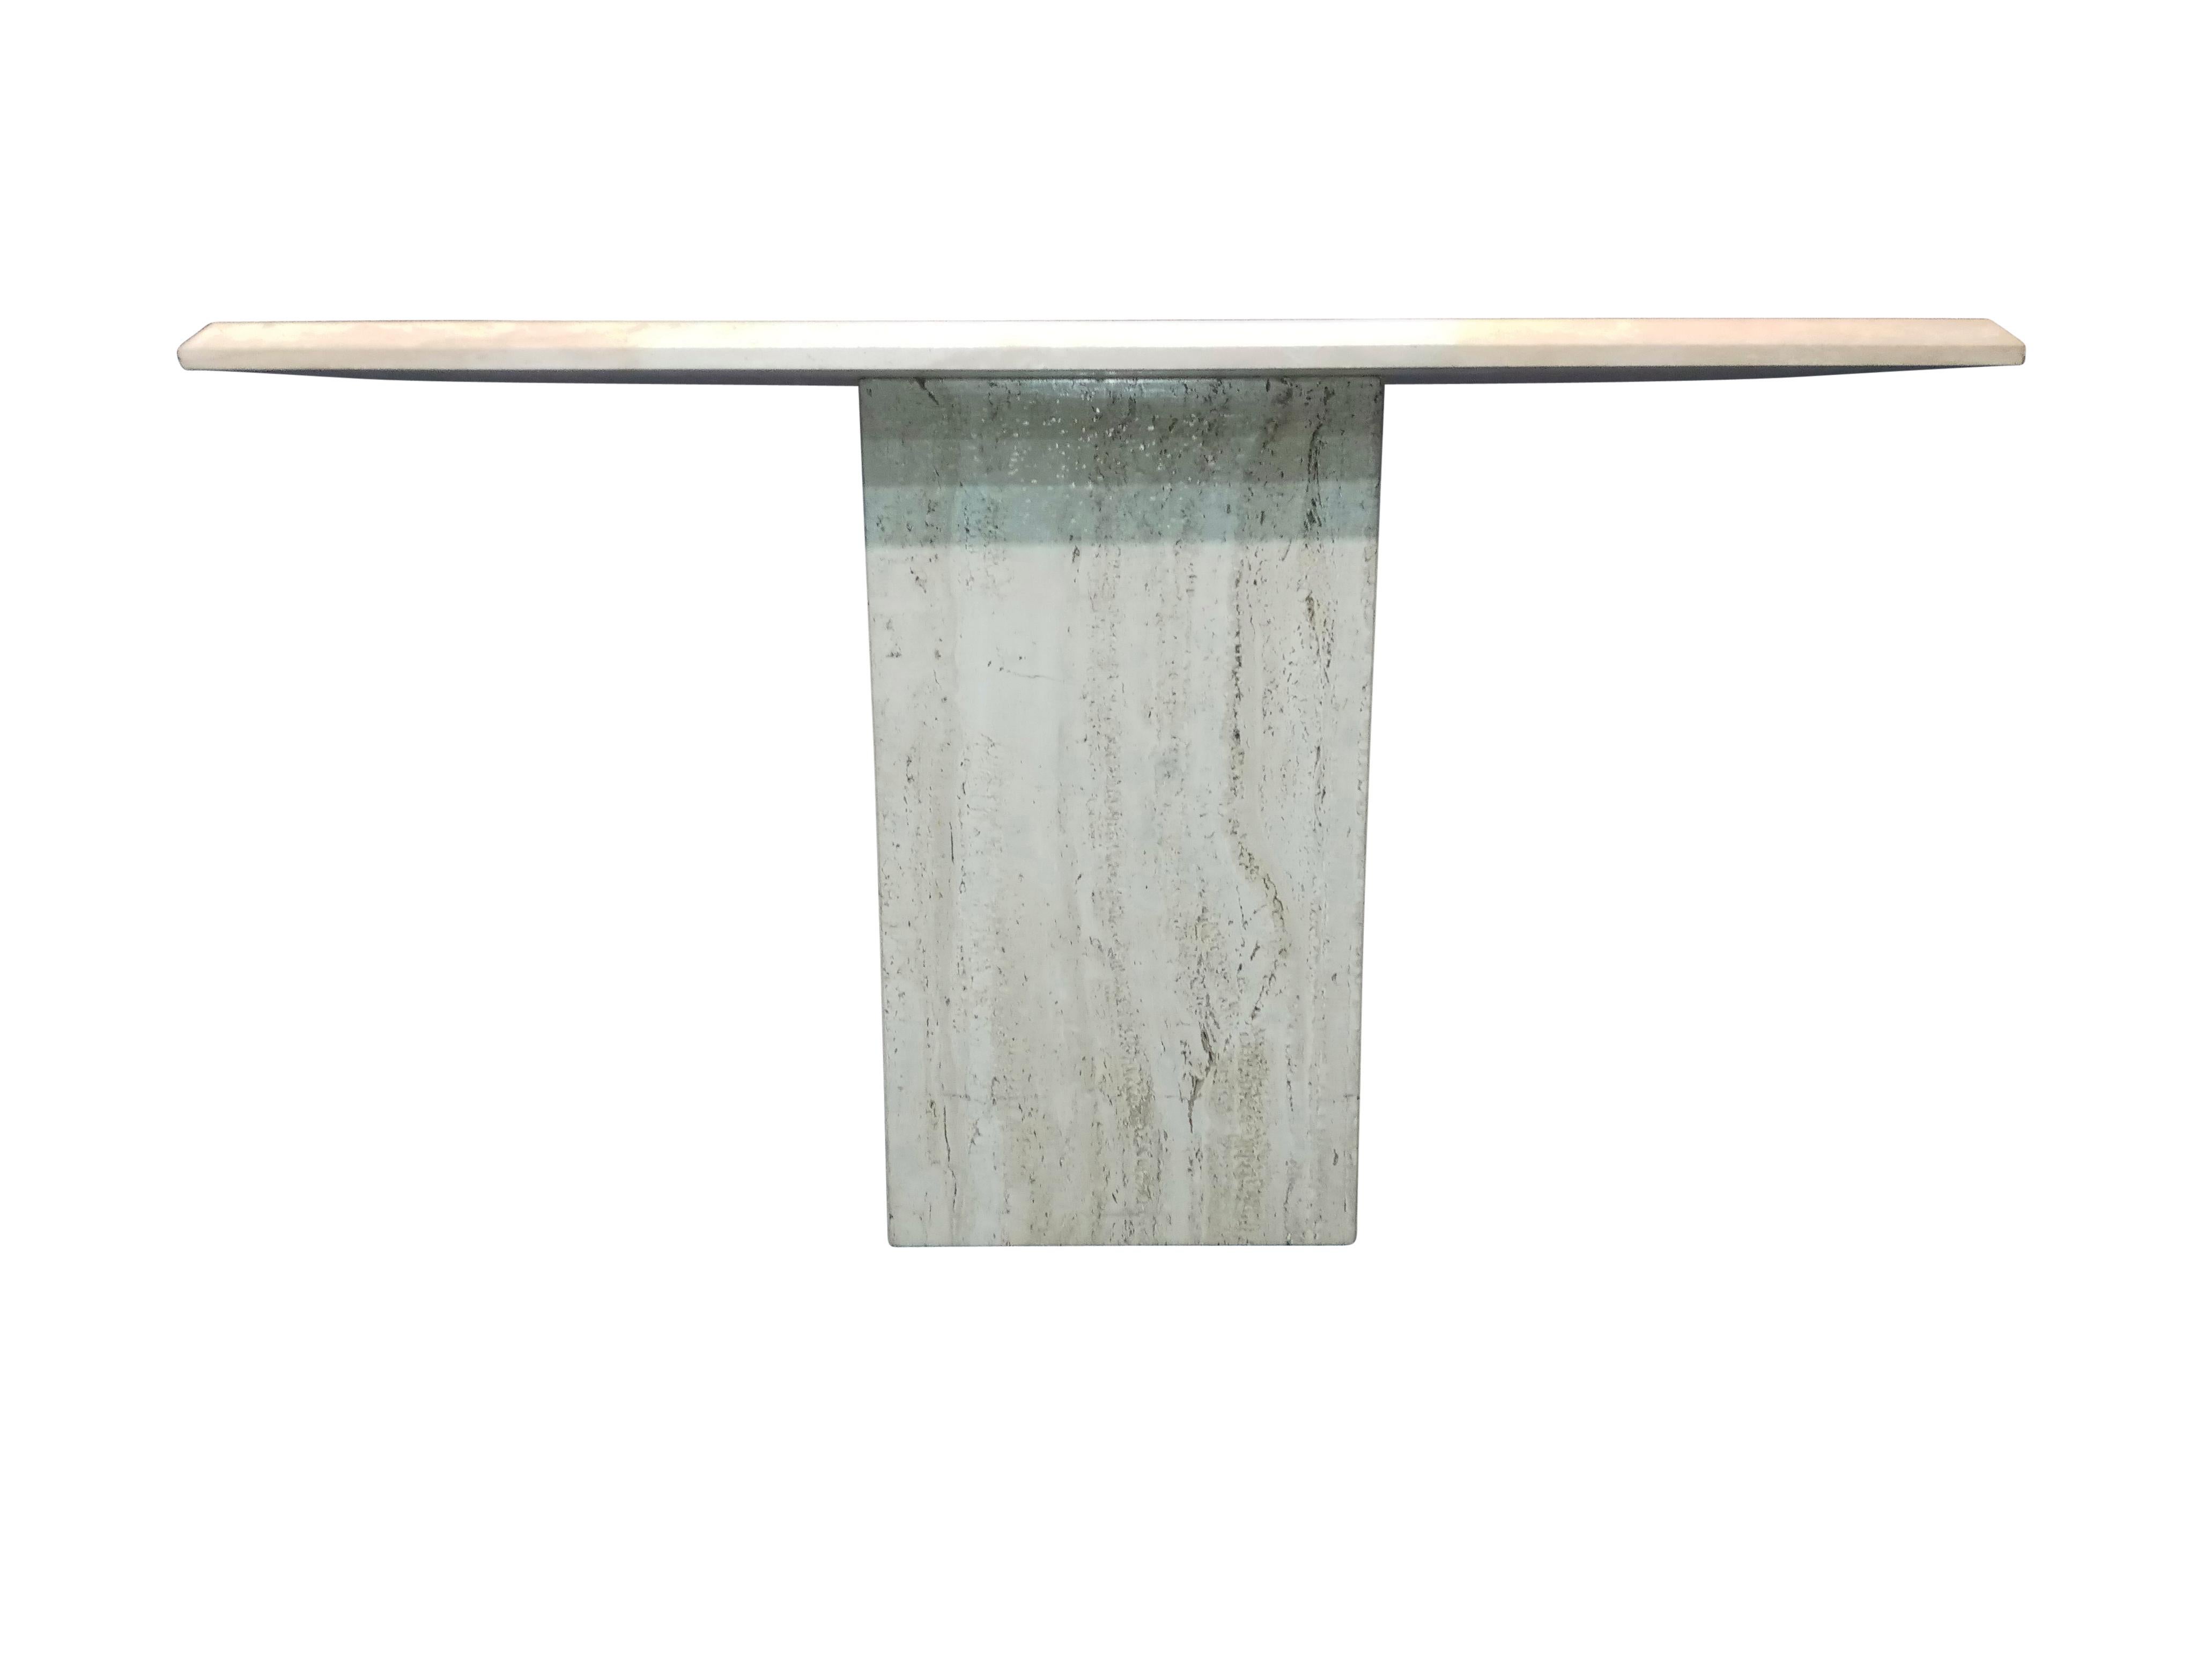 Vintage Italian travertine console table. With polished top on semi-porous base, this bold and practical table can be used in any number of locations in an upscale home. Satin gloss finish makes it perfect for a high-volume area, where you might